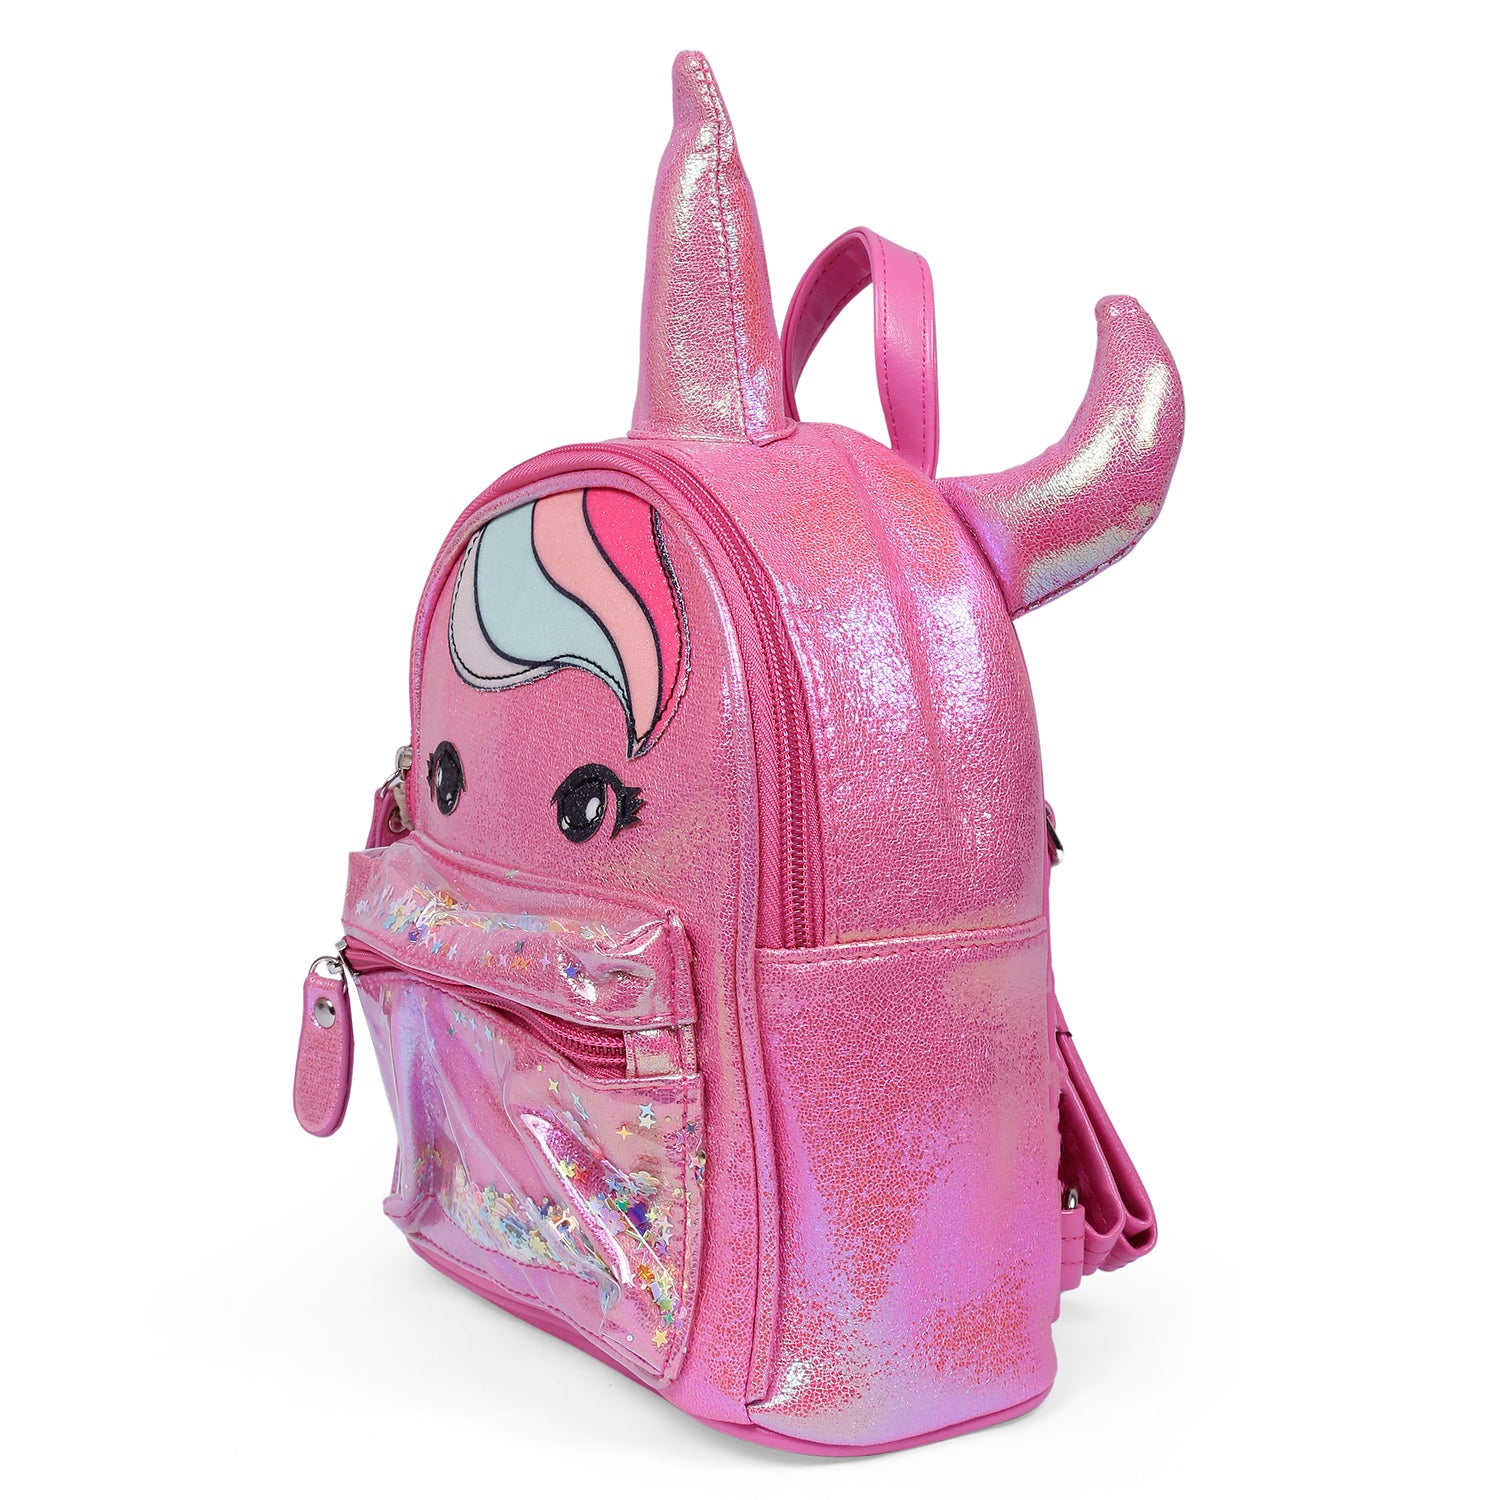 Unicorn Sequined Dual Tone Backpack Trendy Bag - Hot Pink - Baby Moo